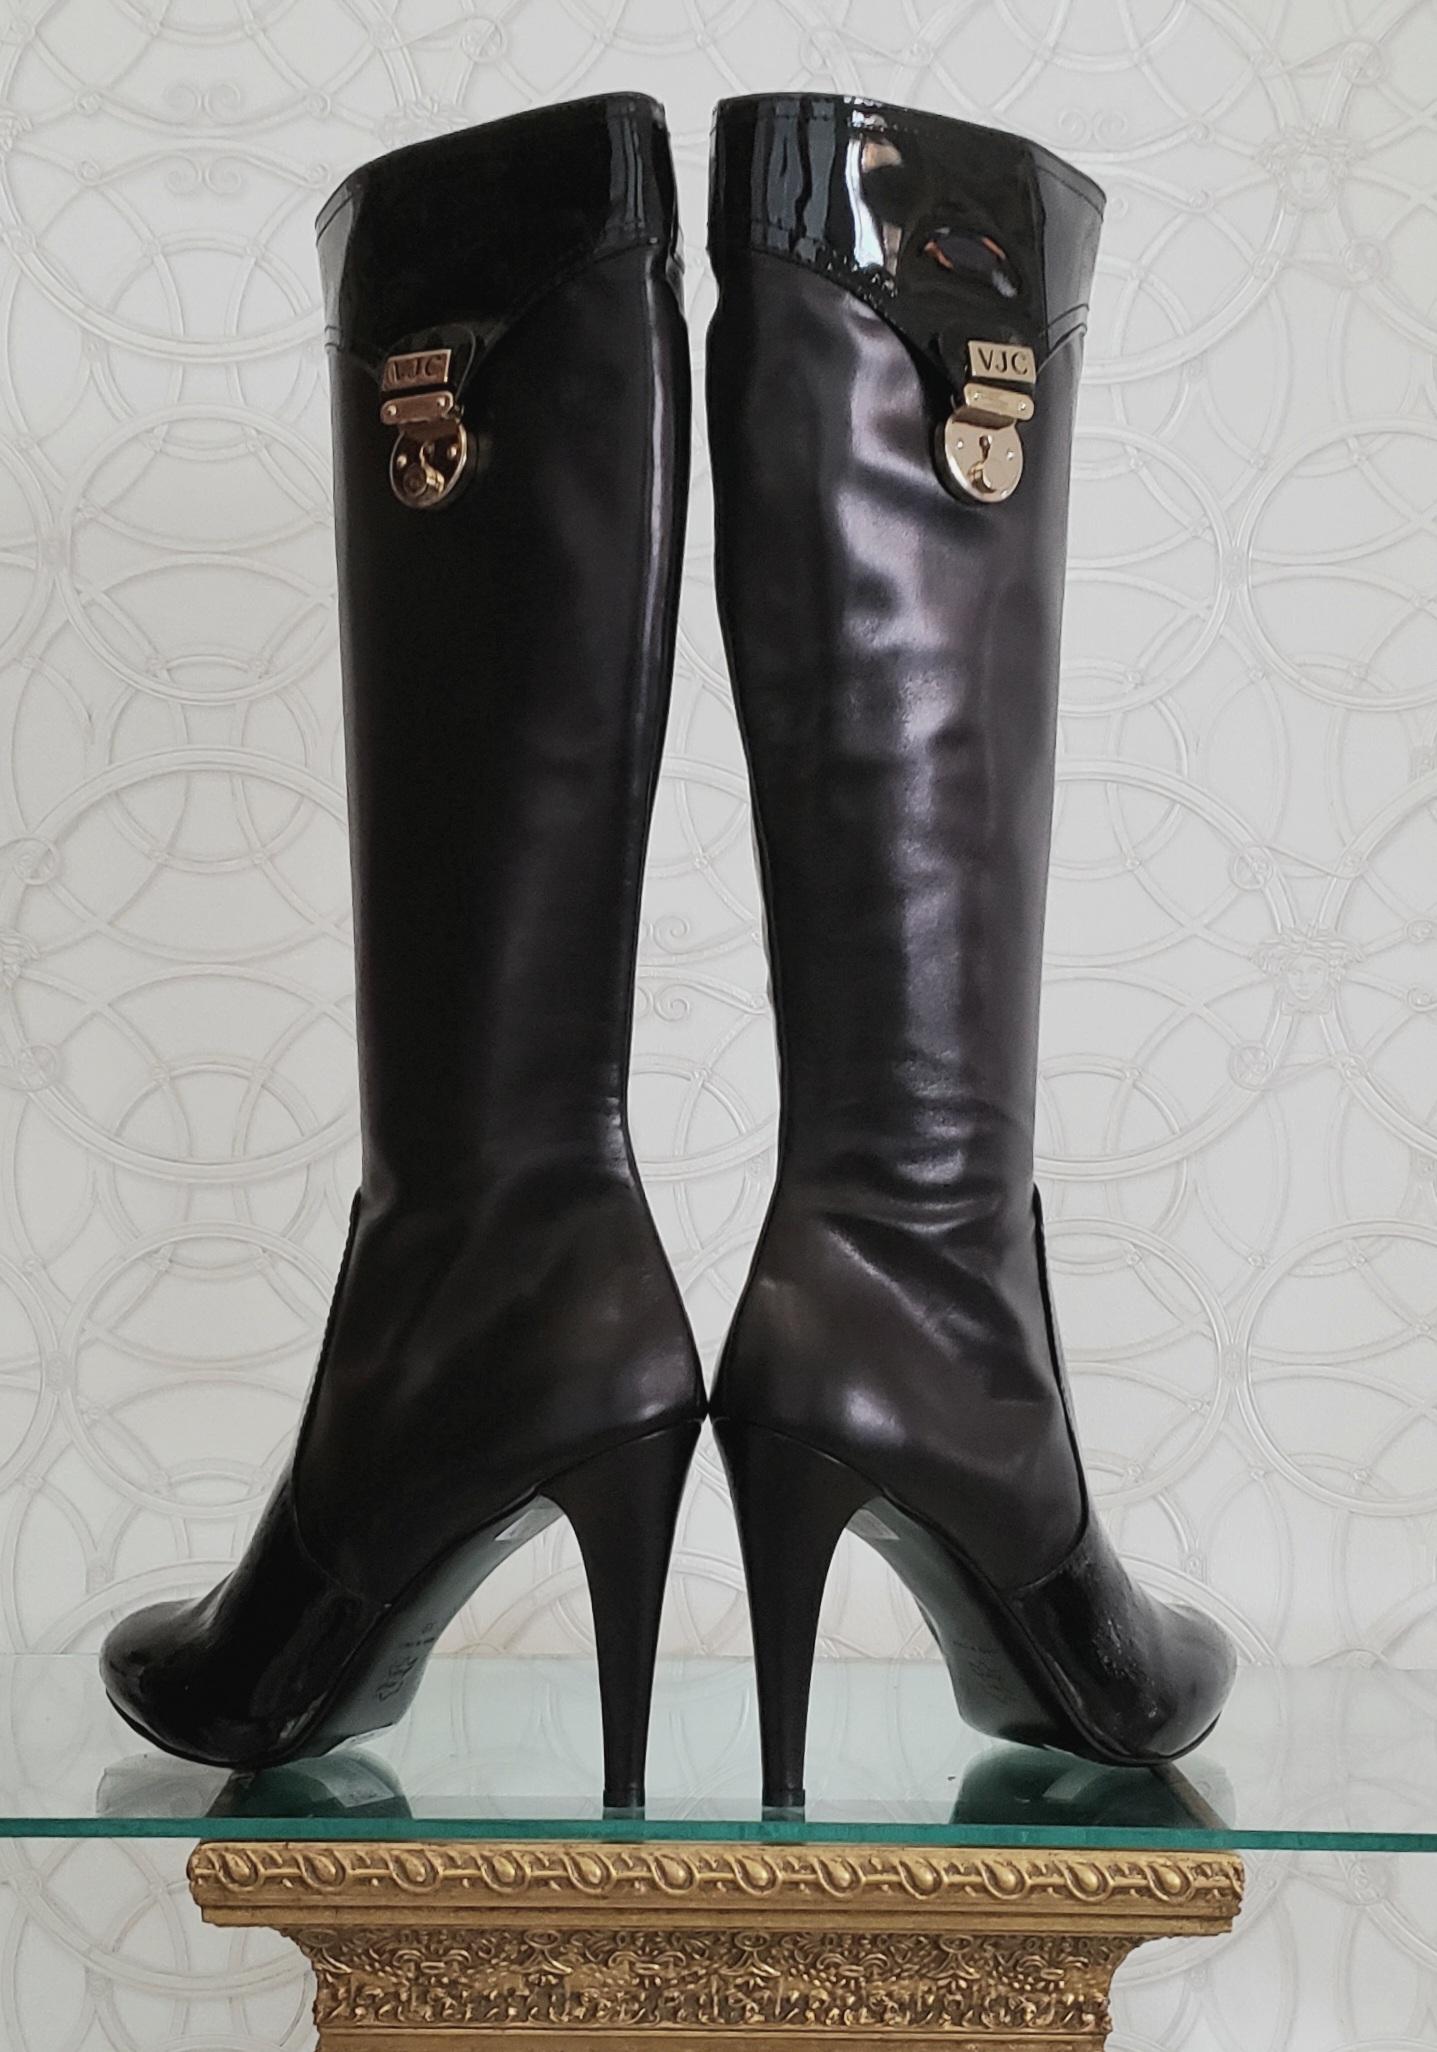 NEW VERSACE VJC BLACK LEATHER BOOTS with PATENT LEATHER INSERTS  39 - 9 For Sale 1